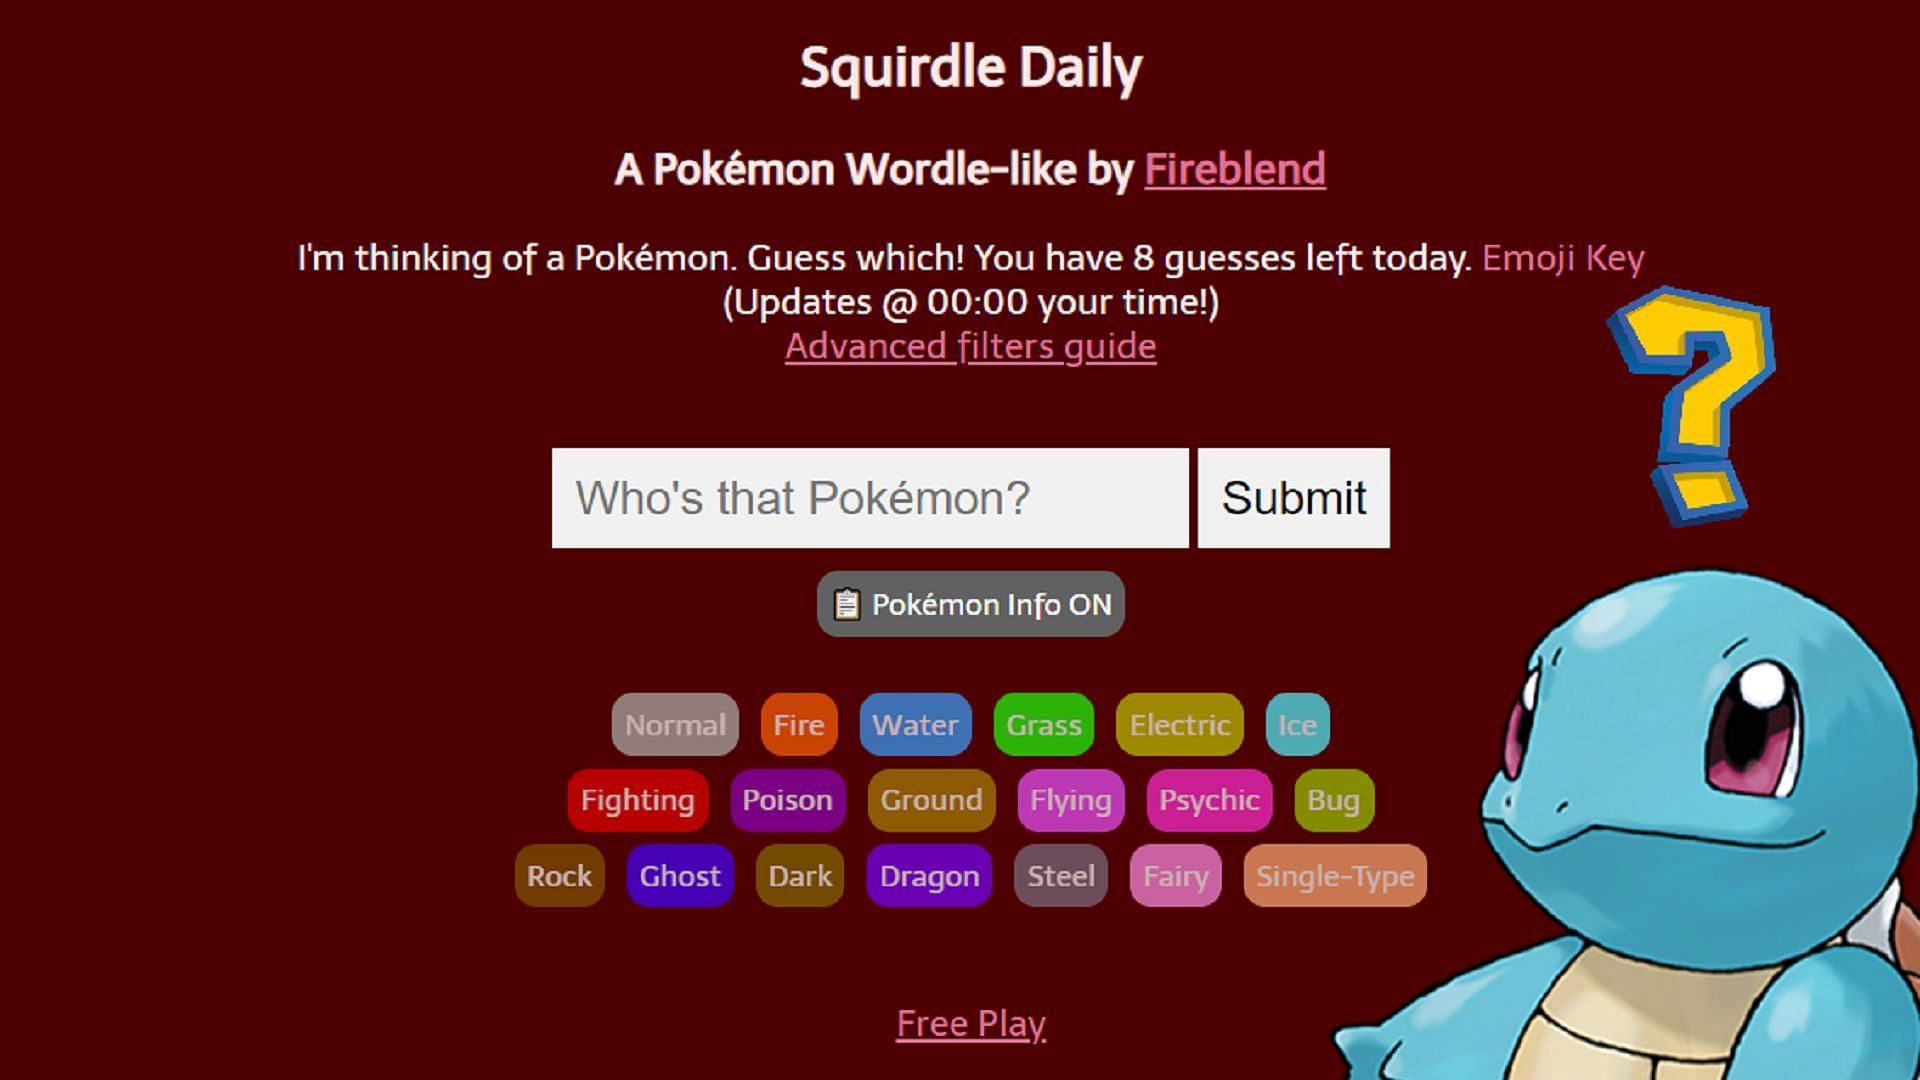 Pokémon meets Wordle with 'Squirdle' where you have guess the monster